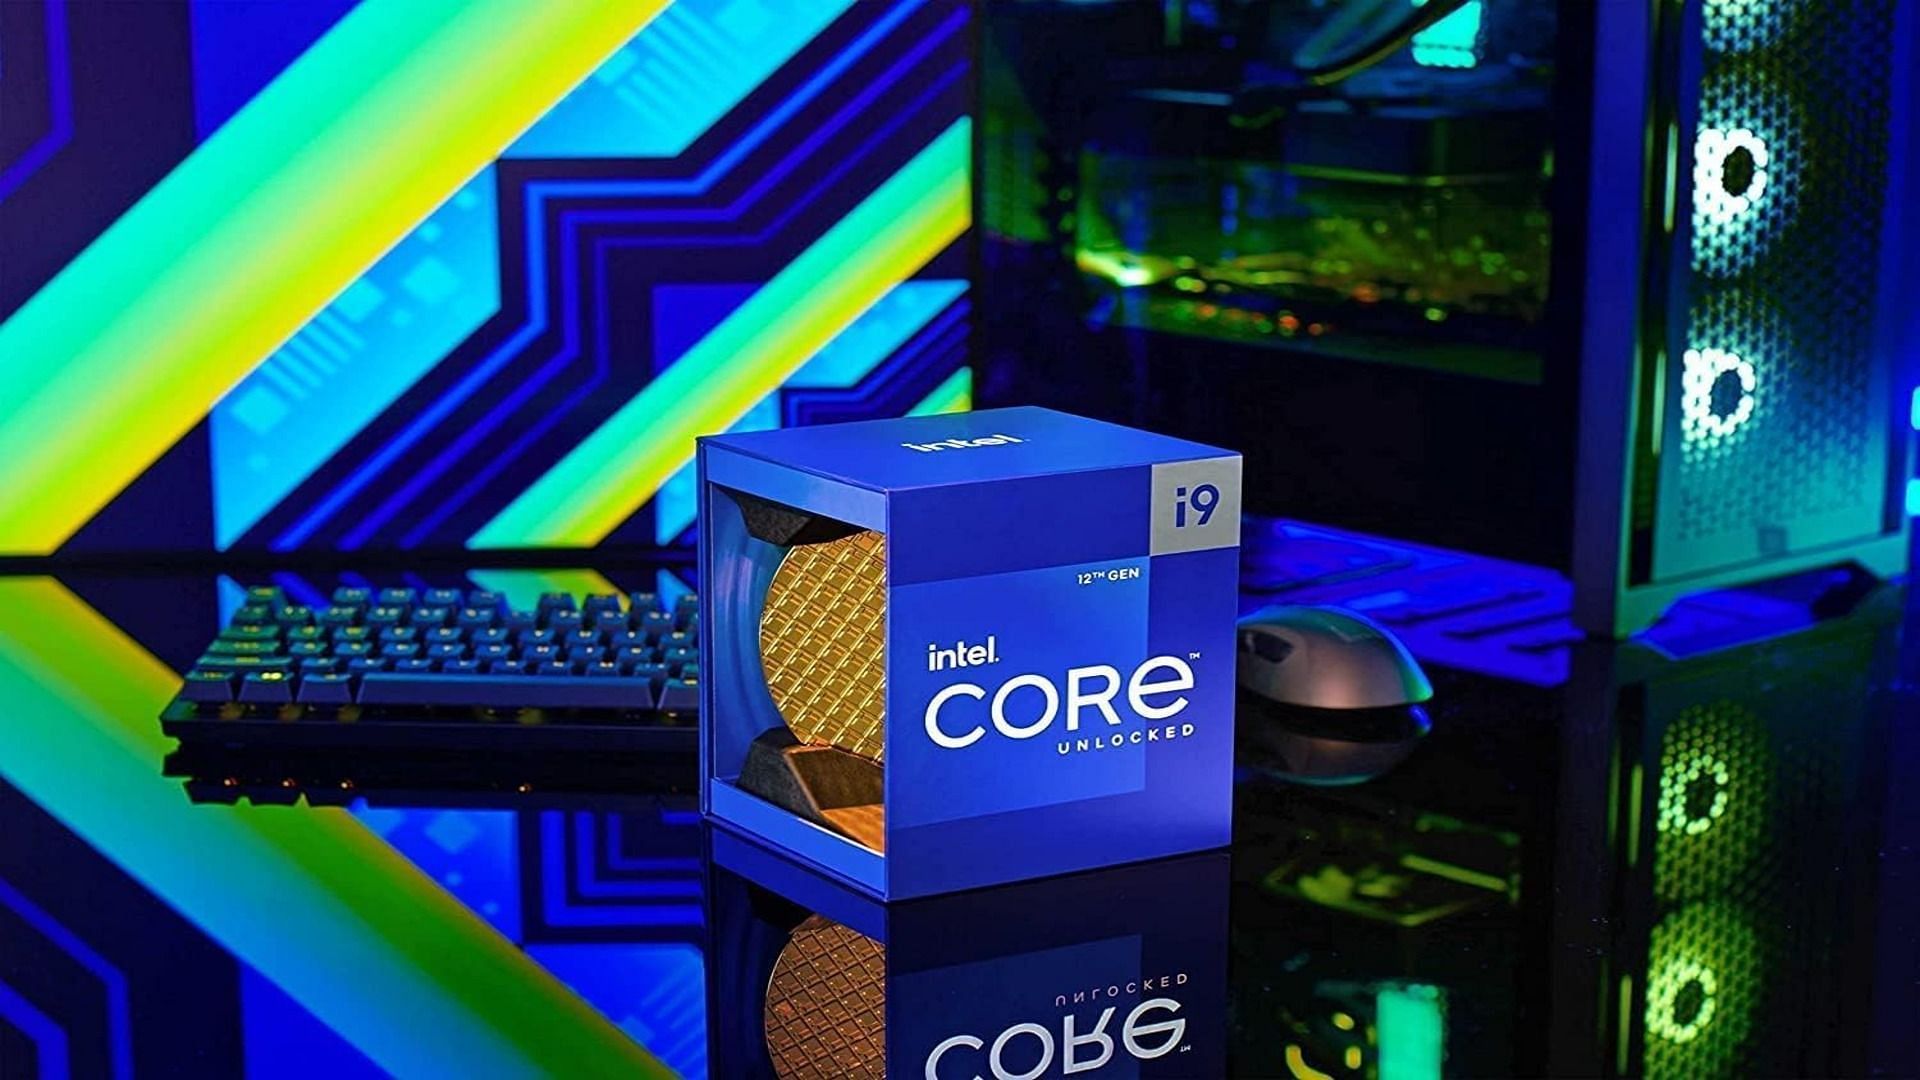 Intel Core i9 12900K vs AMD Ryzen 7 5800X3D: Which is the best gaming CPU?